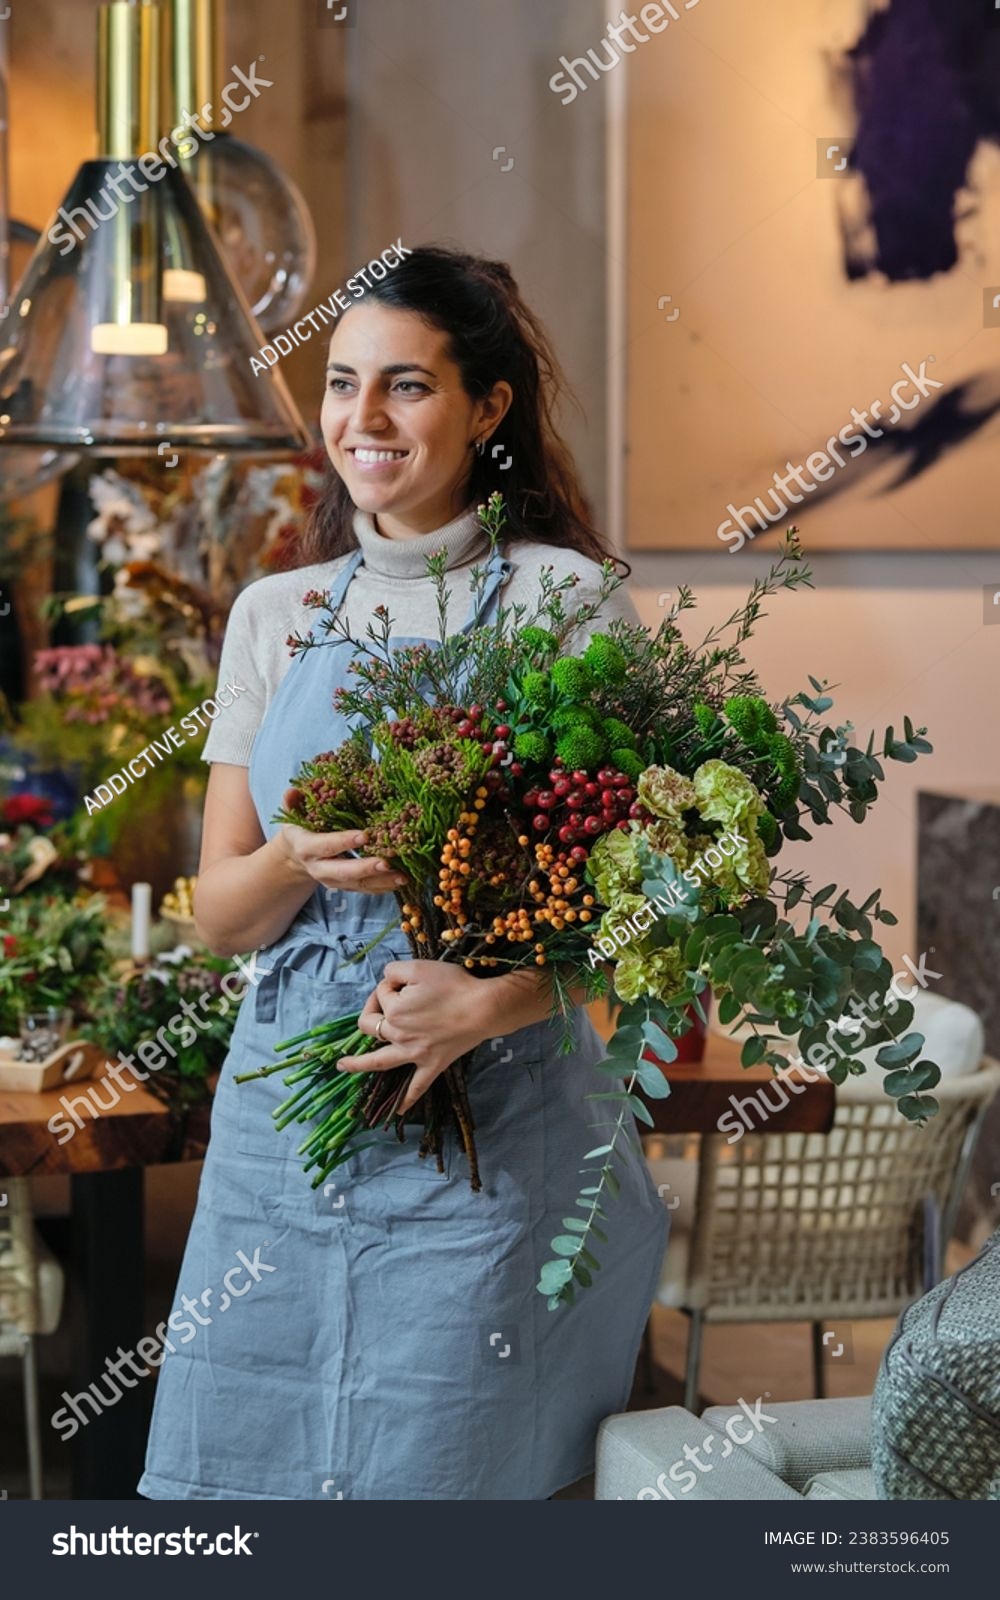 Smiling young woman in blue apron touching arranged flower bouquet and looking away while working in floral shop on blurred background #2383596405